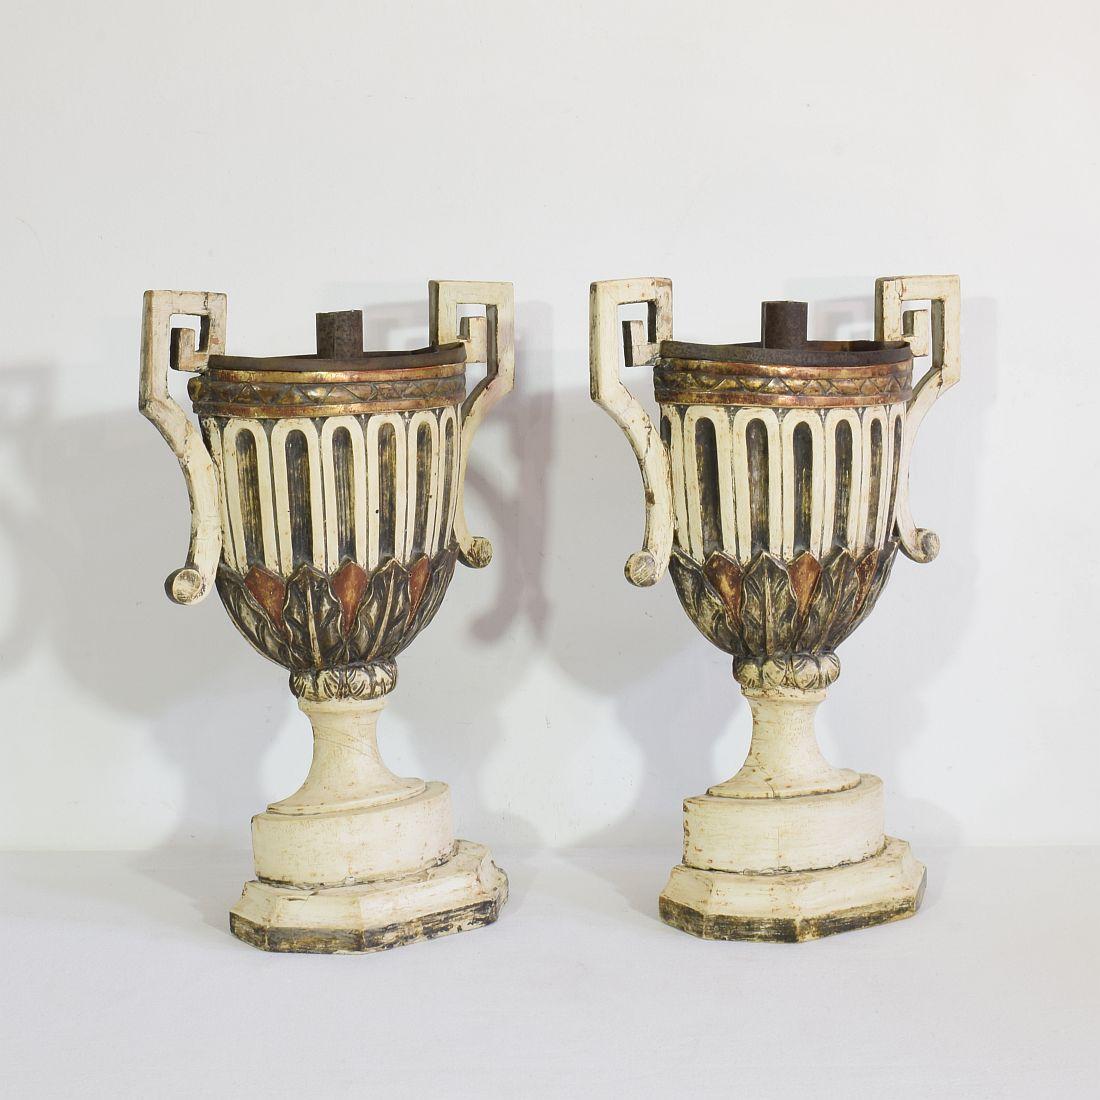 Pair of 18th Century Italian Neoclassical Altar Candleholders In Good Condition For Sale In Buisson, FR